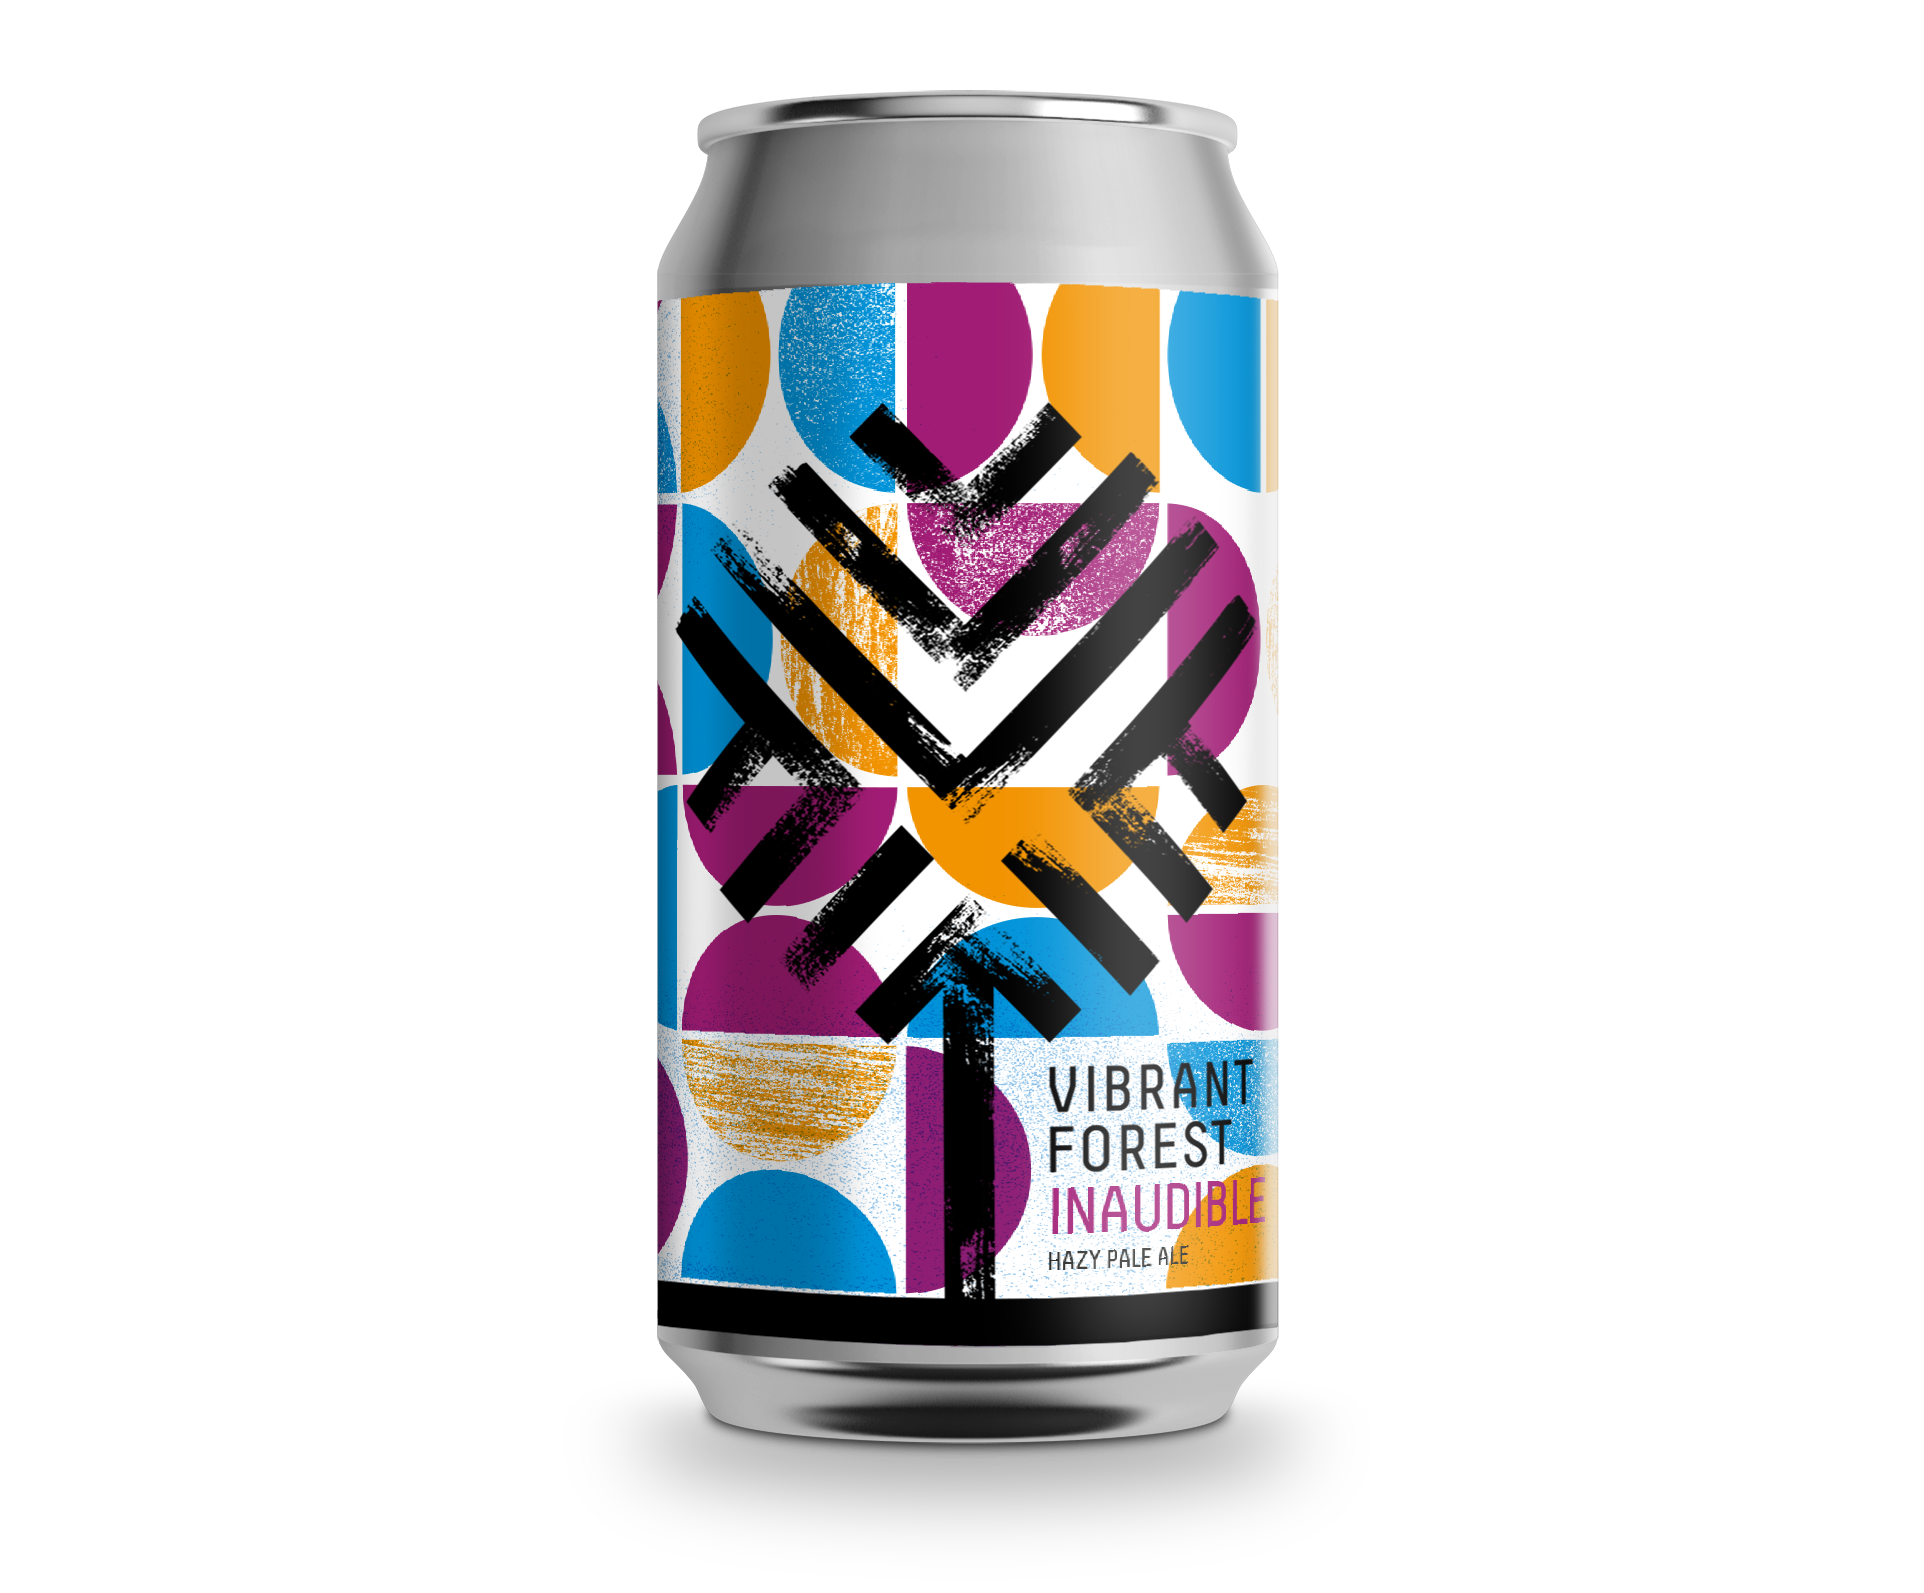 VIBRANT FOREST BREWERY